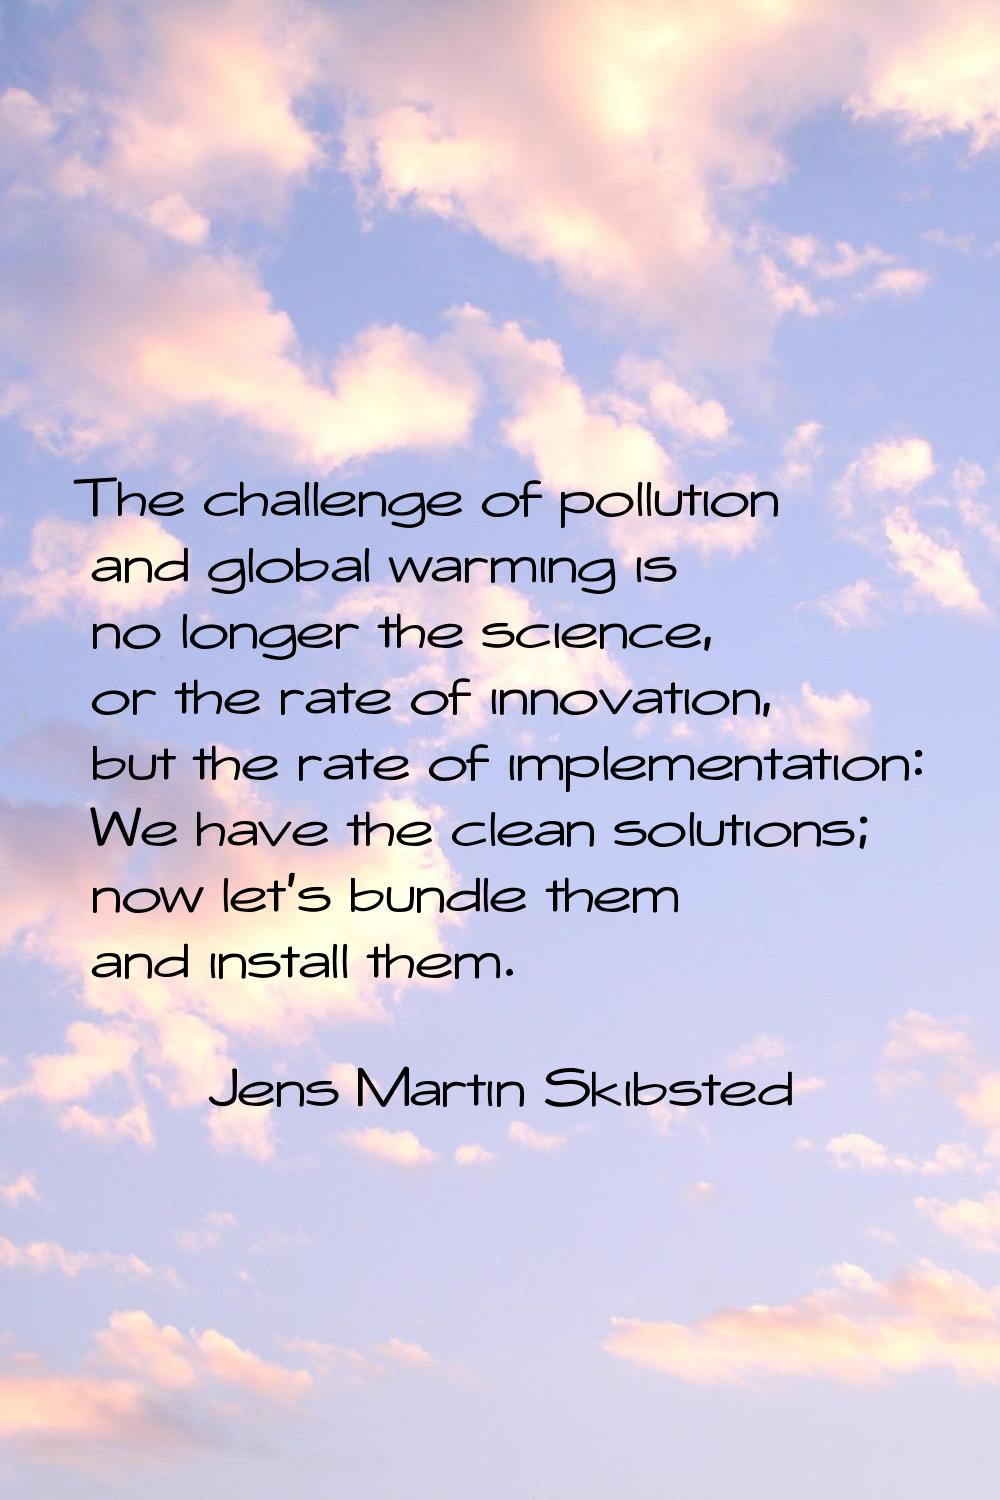 The challenge of pollution and global warming is no longer the science, or the rate of innovation, 